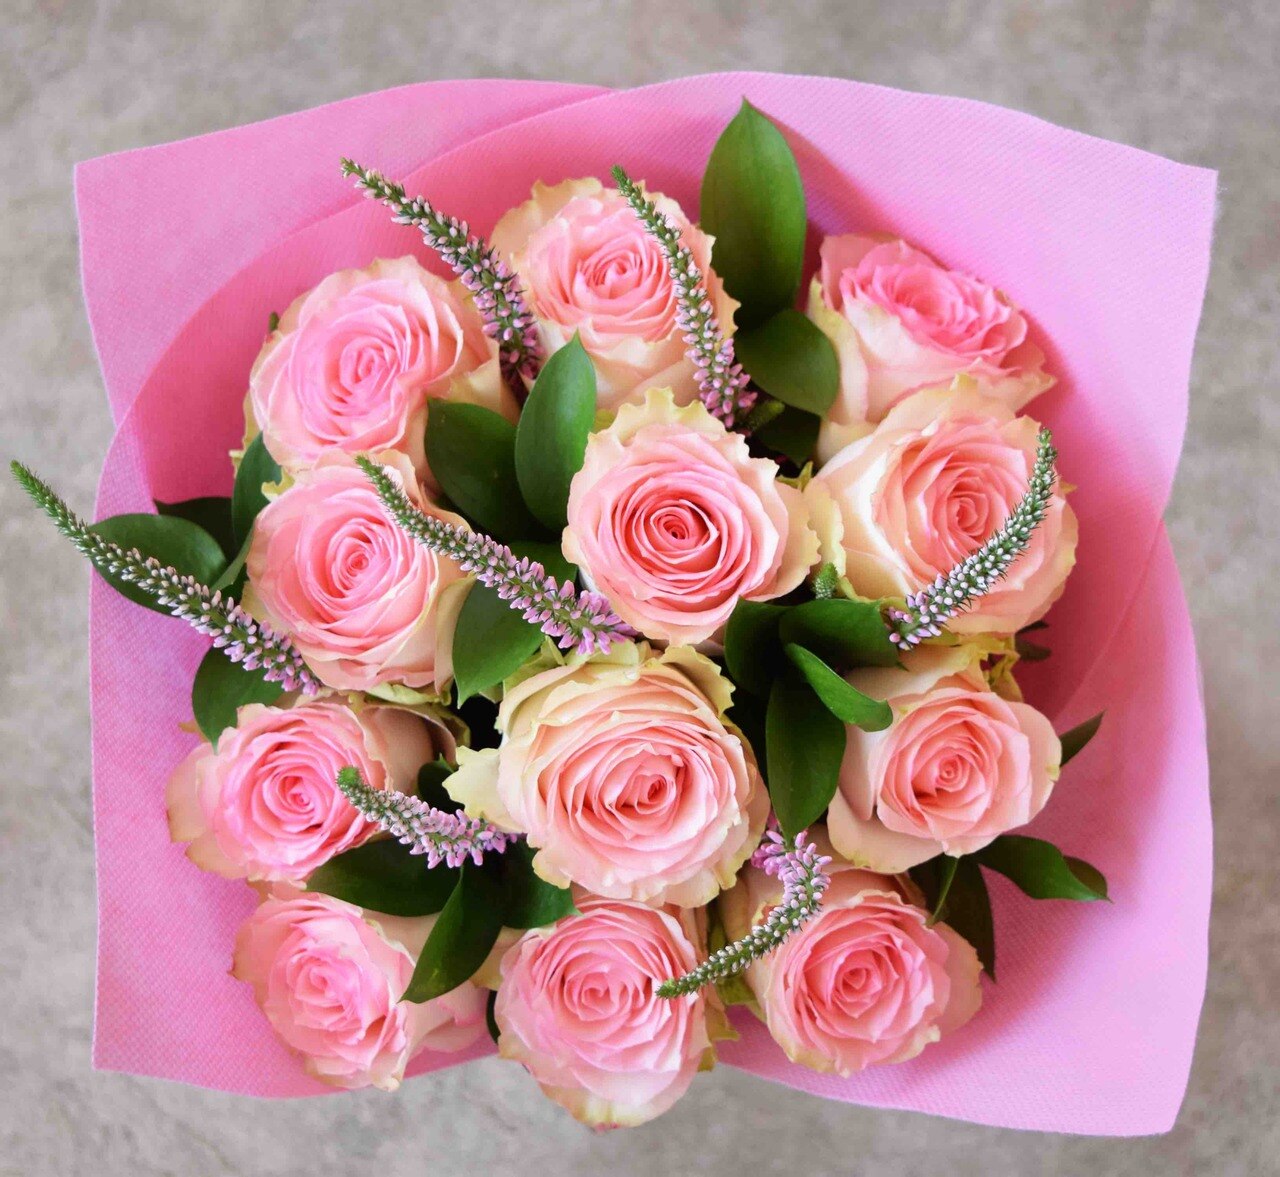 Just Roses Valentine's Day Bouquets - 8 Bqts, 40cm, 25 Stems